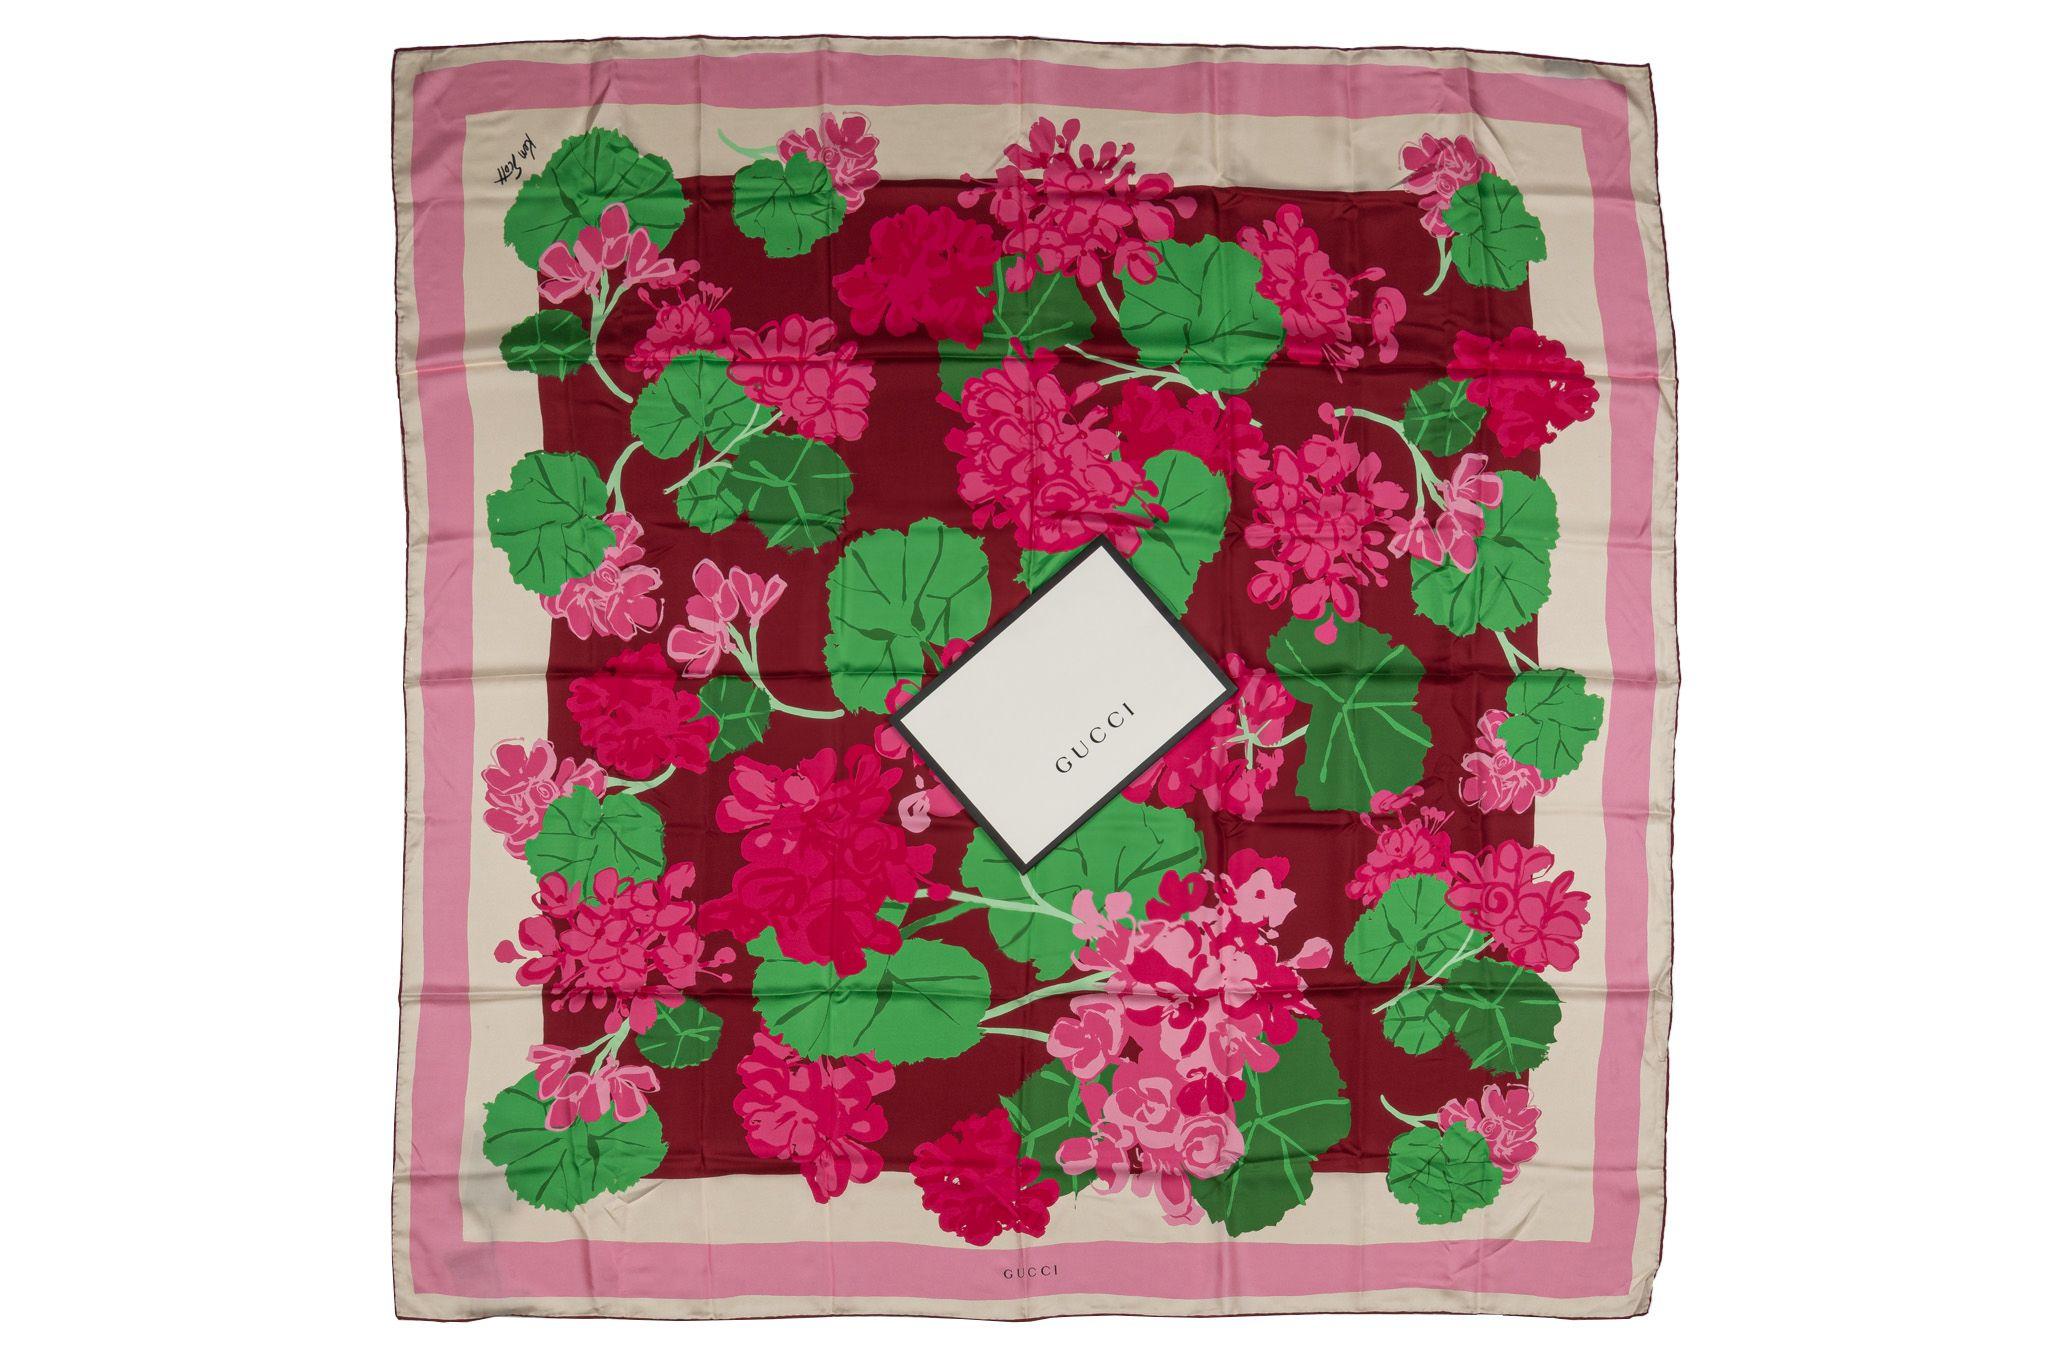 Gucci limited edition Ken Scott floral silk shawl. Brand new with original gift envelope comes with tag.